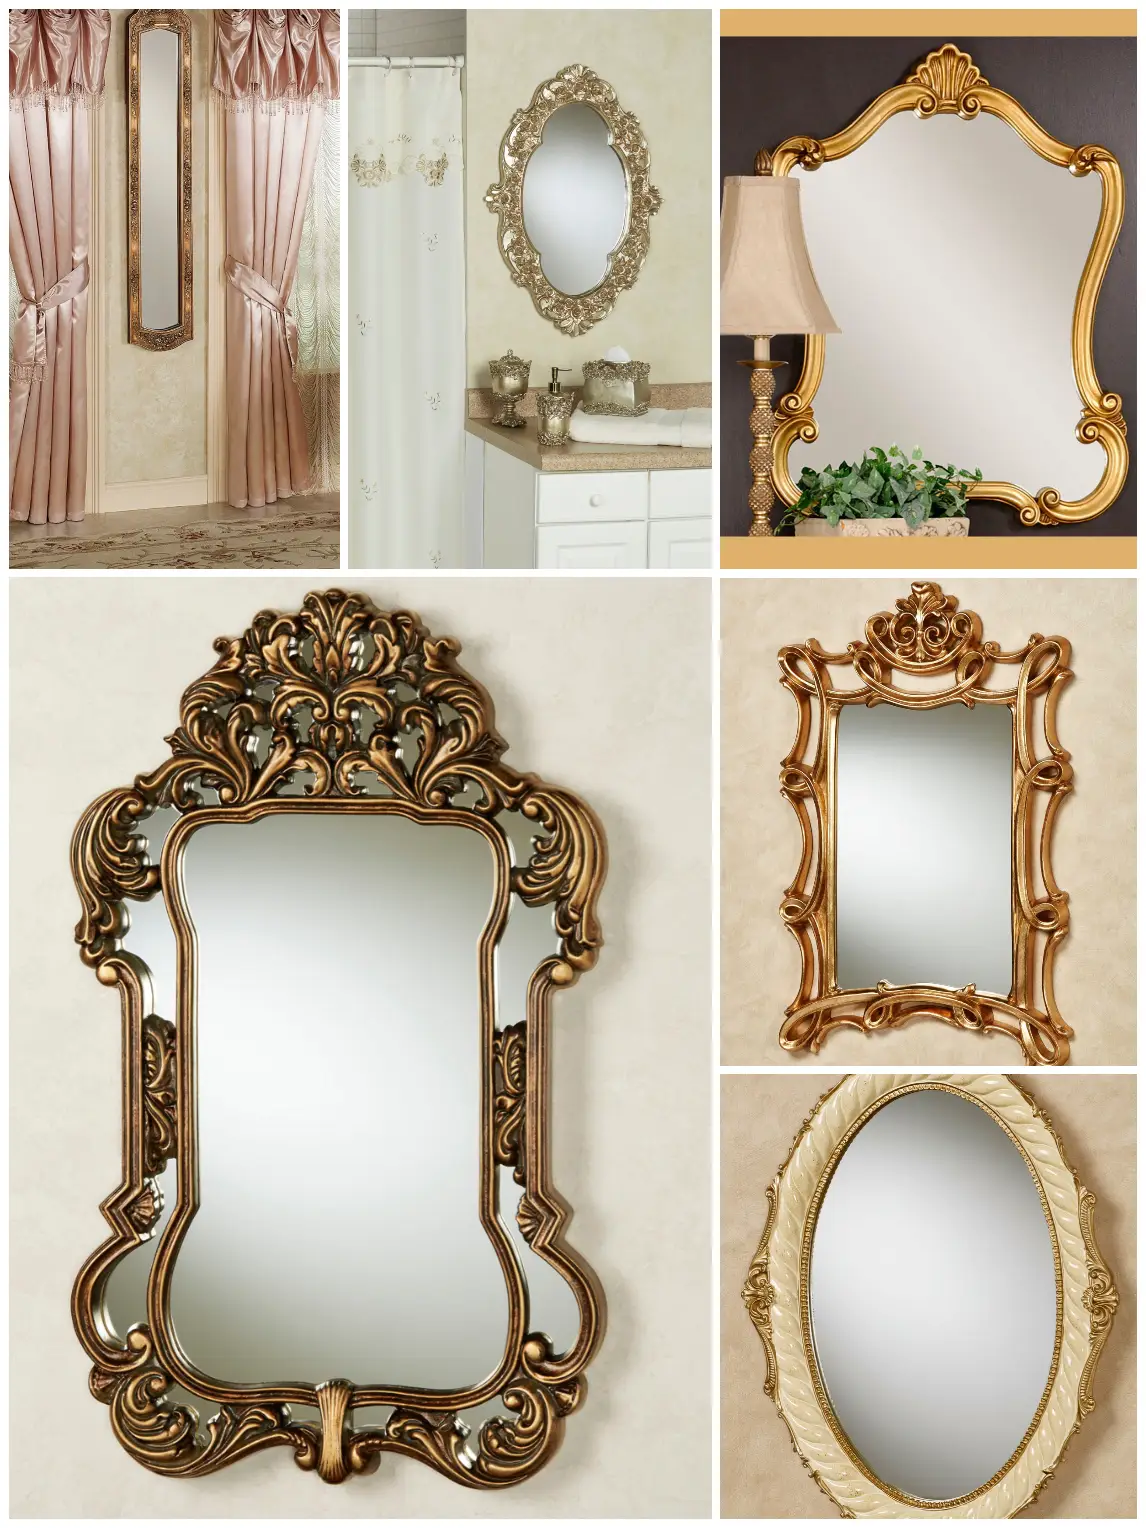  Hickory Manor Oval Mirror with Bow, Antique Gold